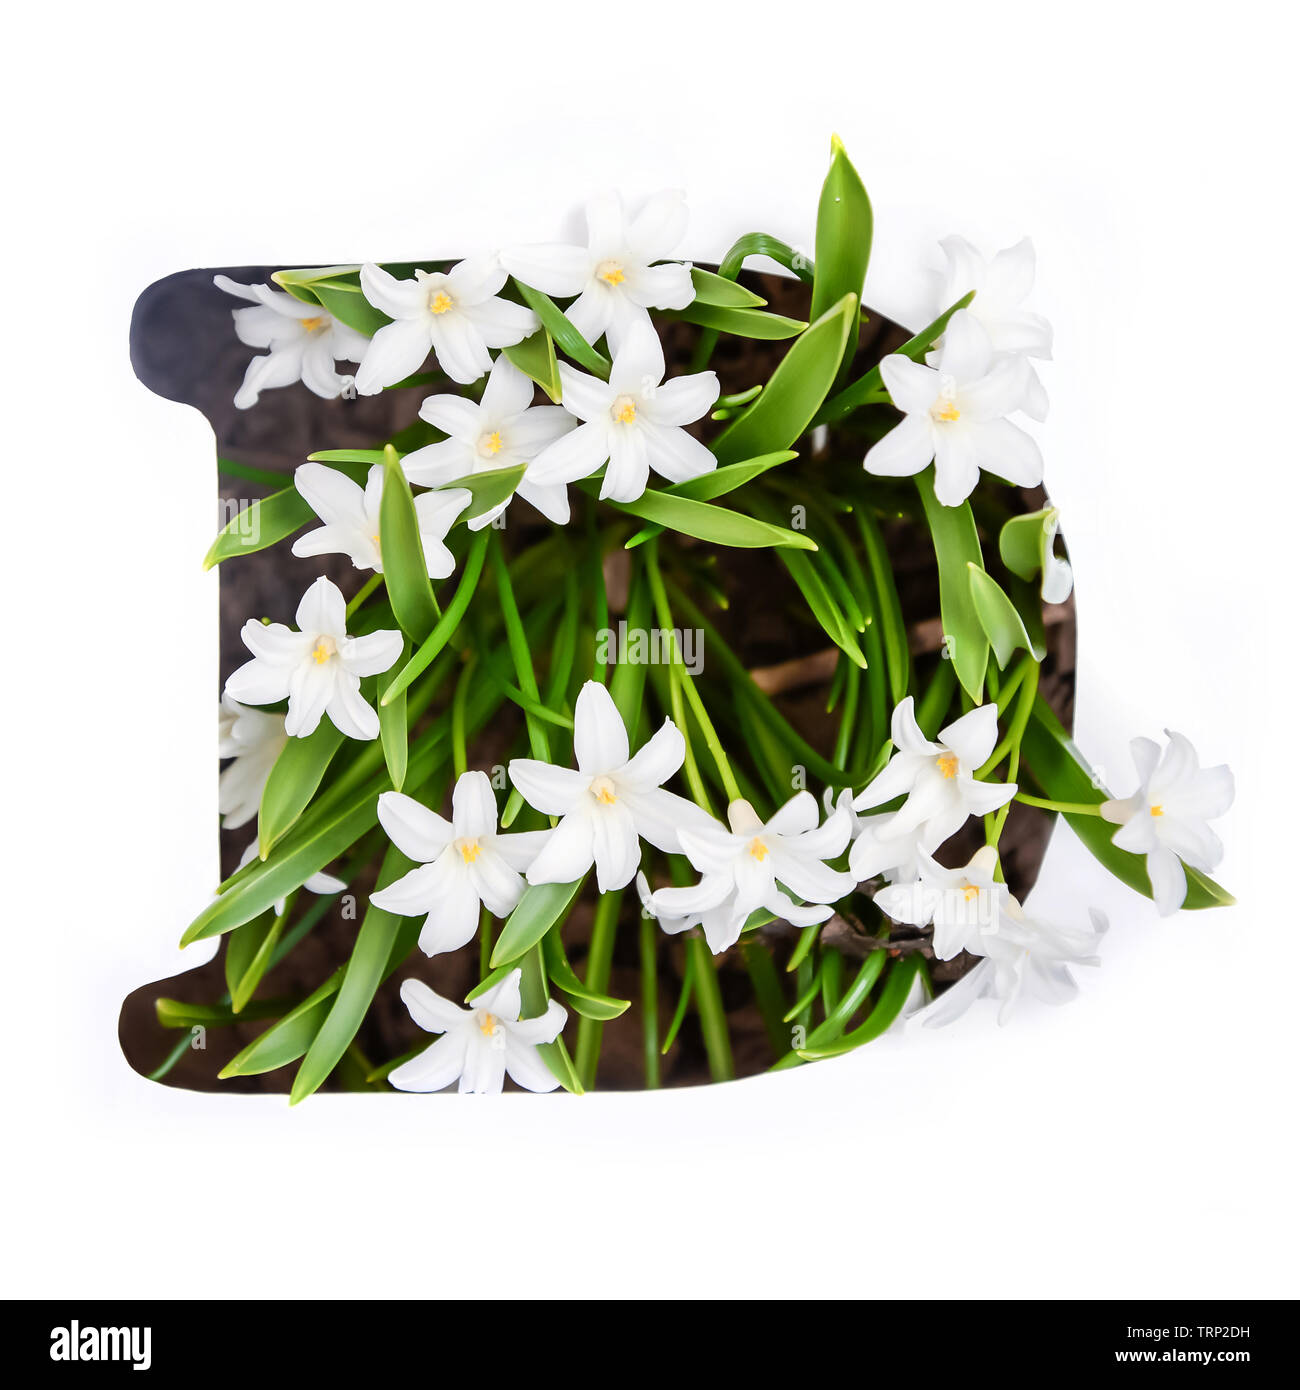 The letter D of the English alphabet of small white chionodoxa flowers Stock Photo